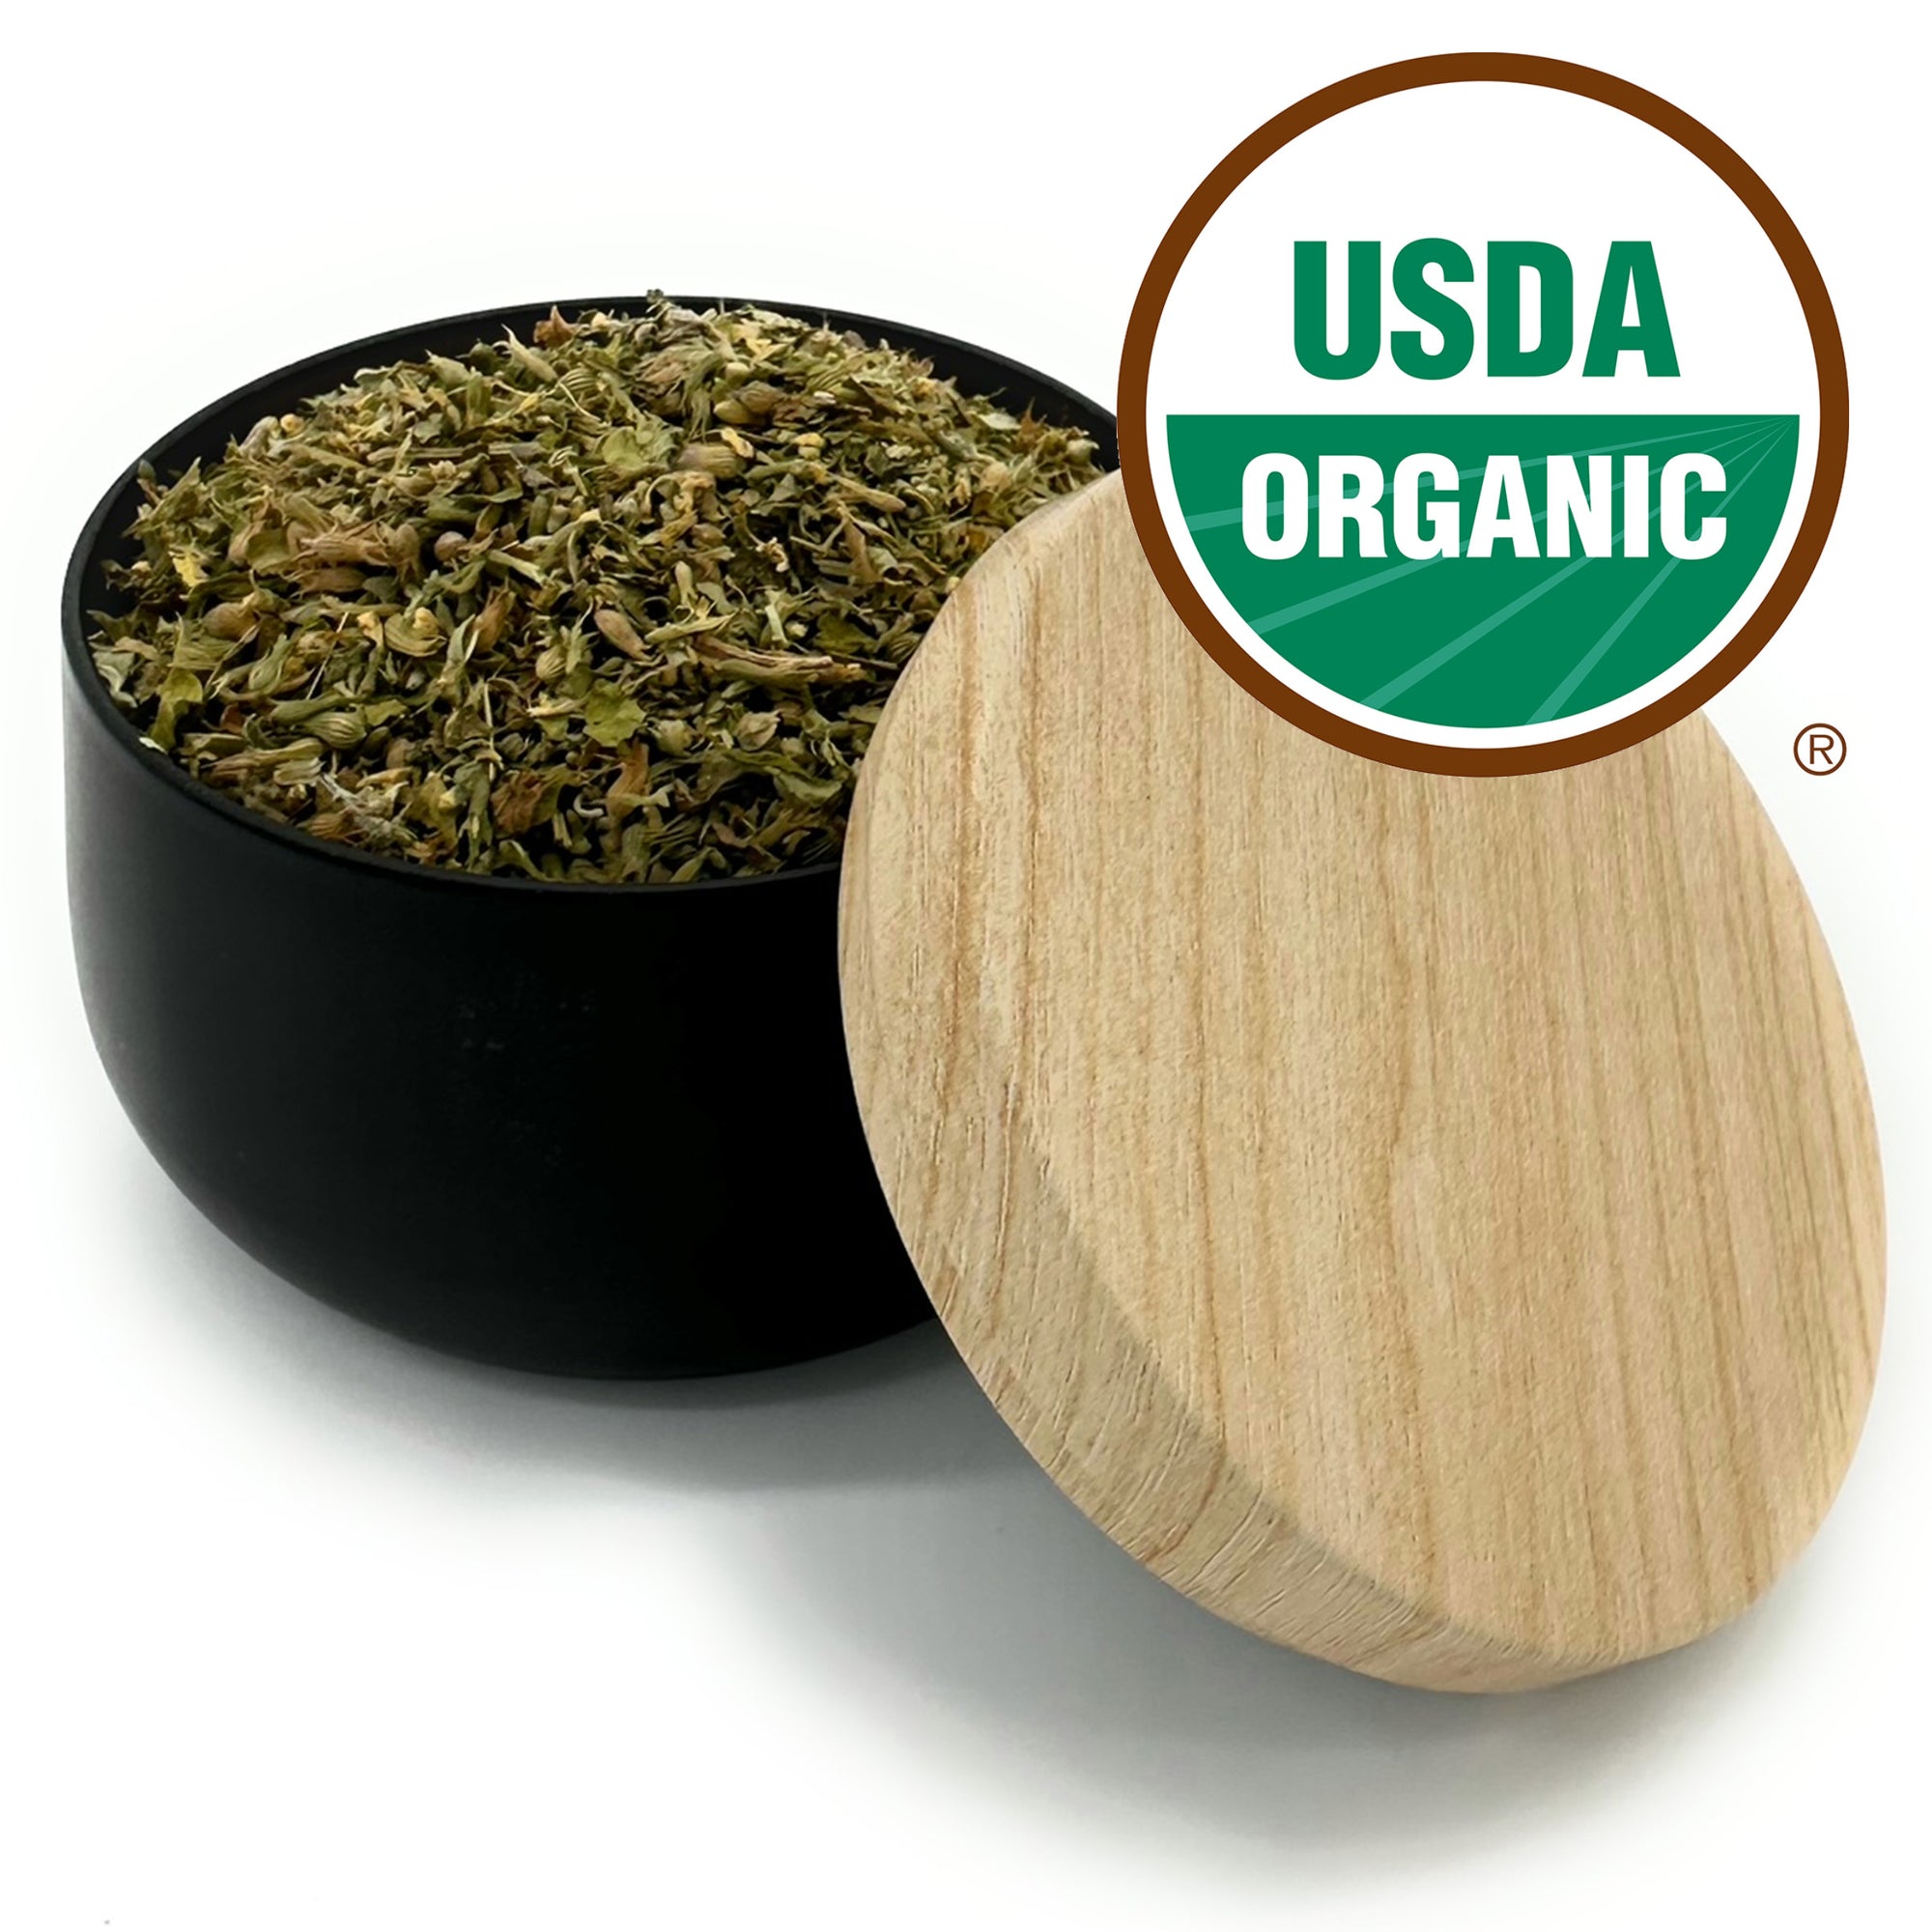 Organic Bliss: USDA Certified Catnip from USA Farms, approx 1 cup